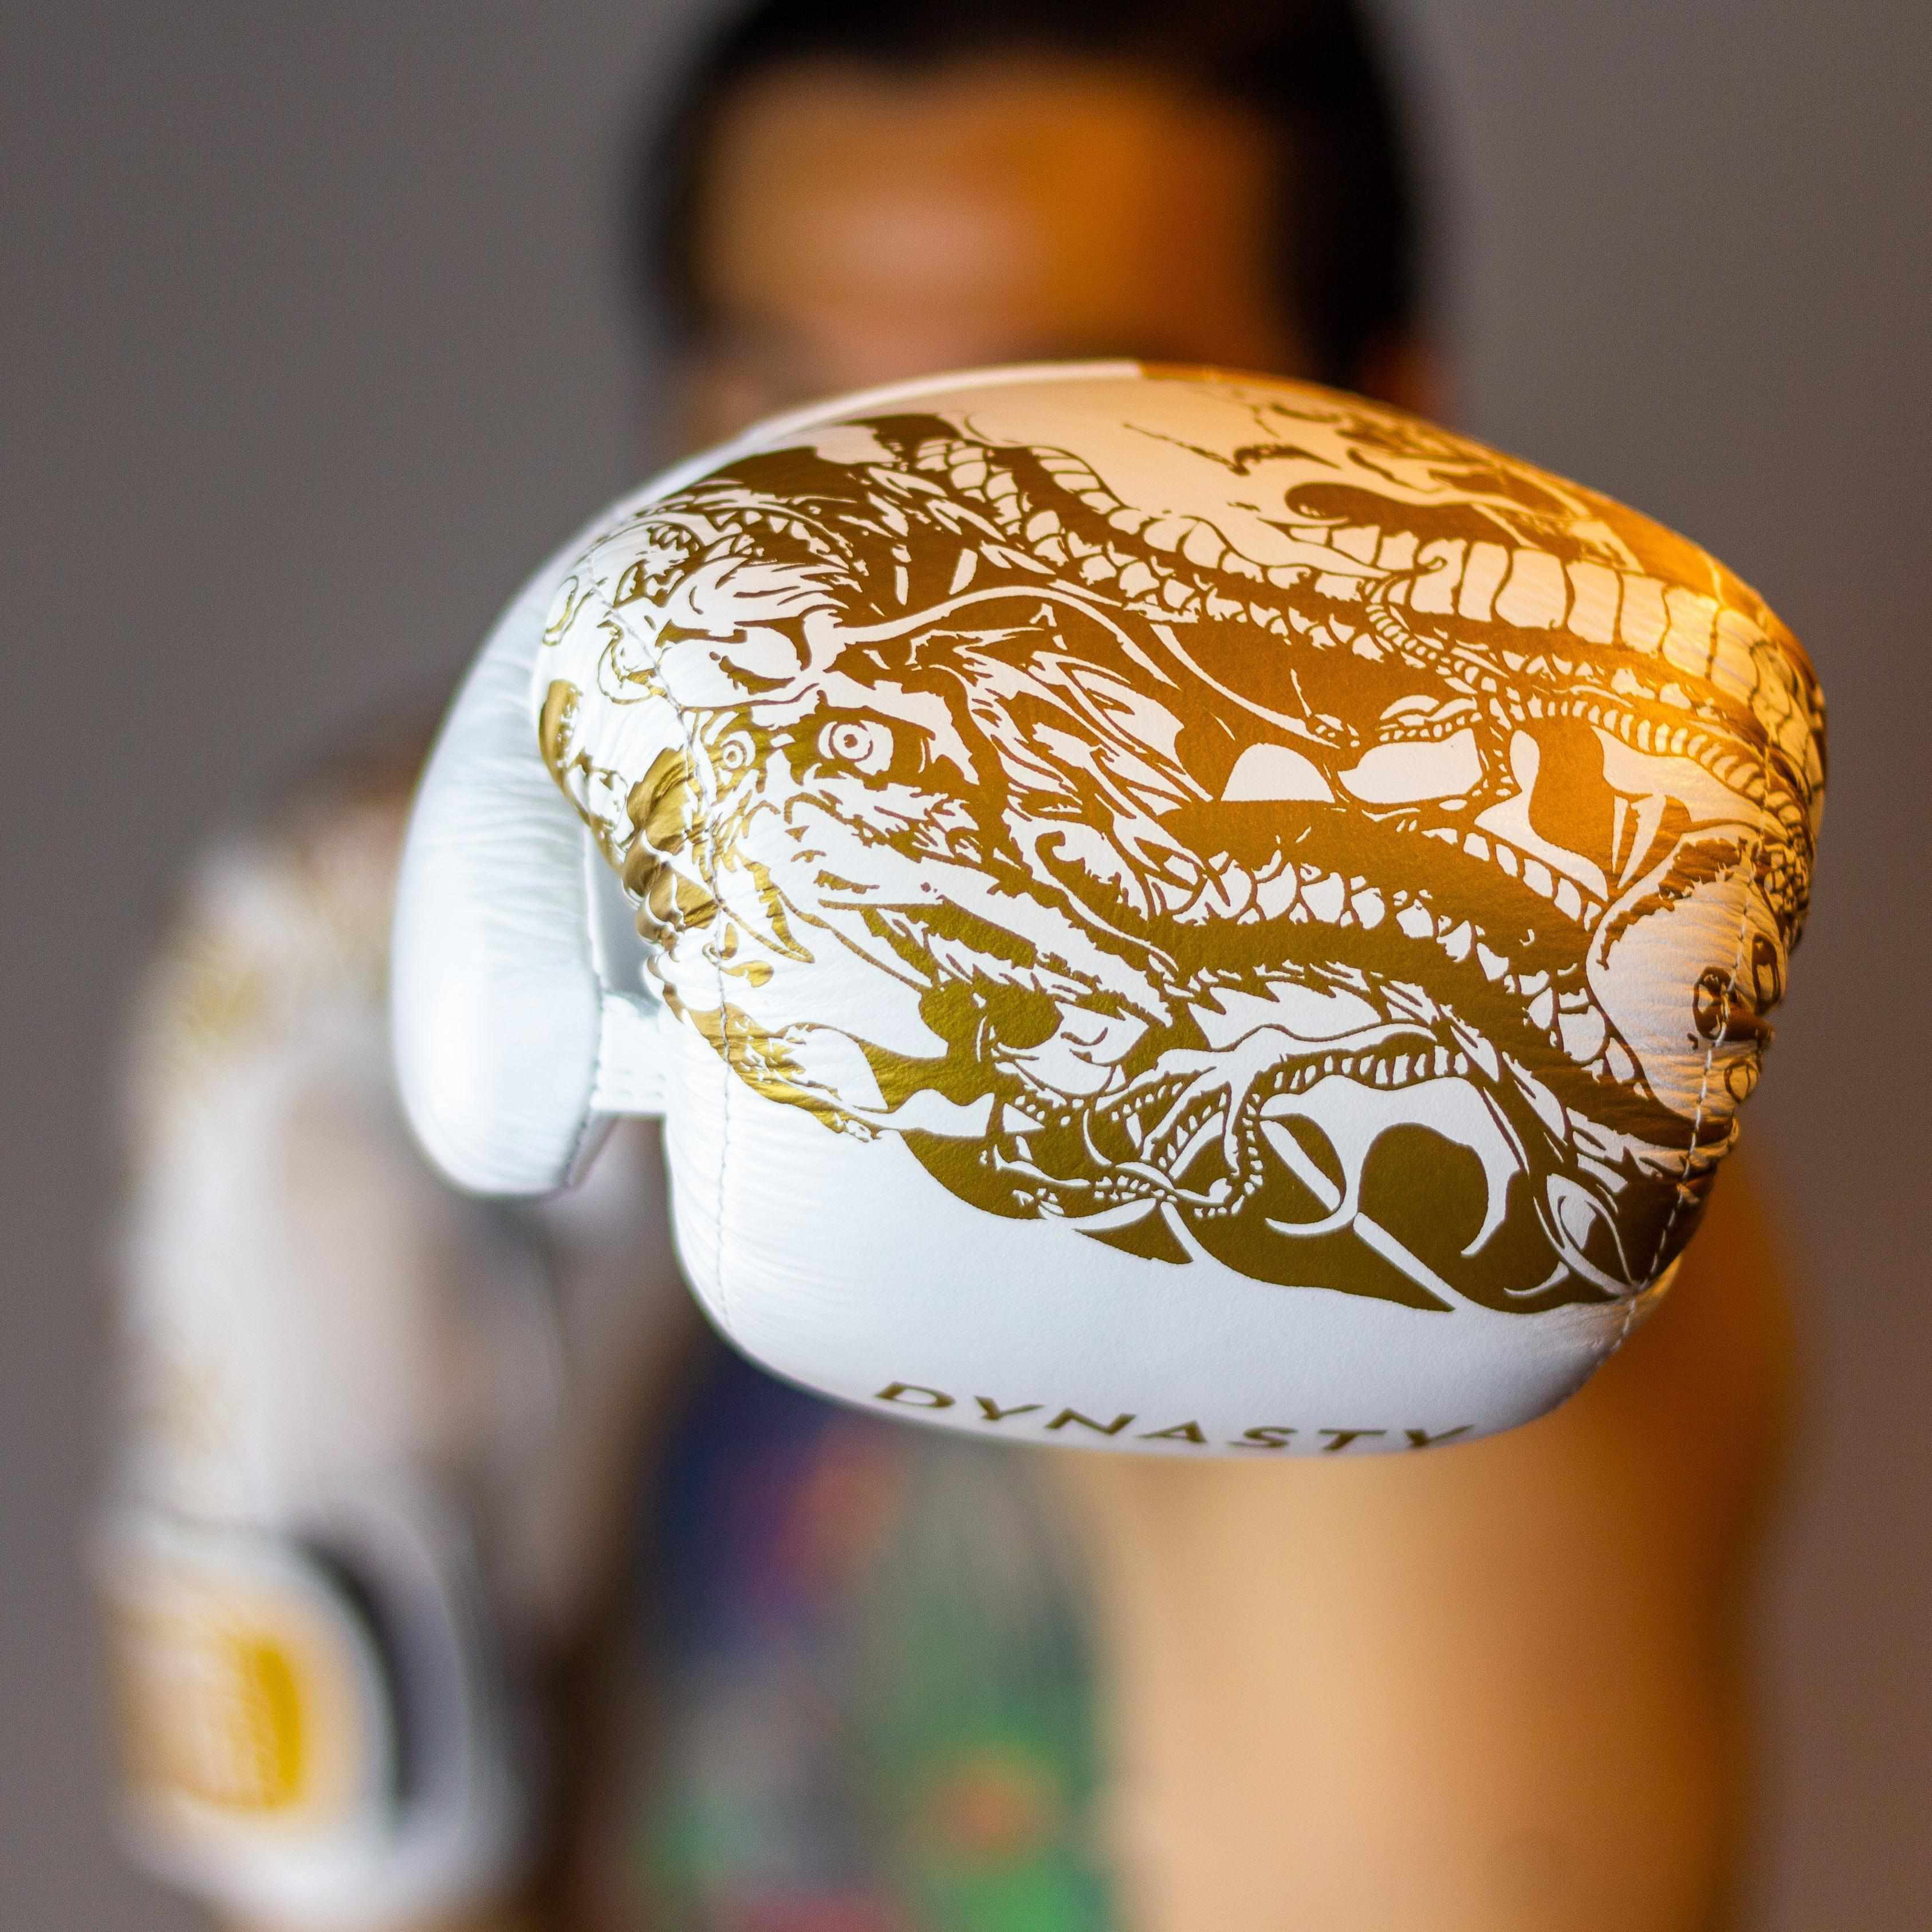 Dueling Dragons 2 Boxing Gloves (White) – Dynasty Clothing